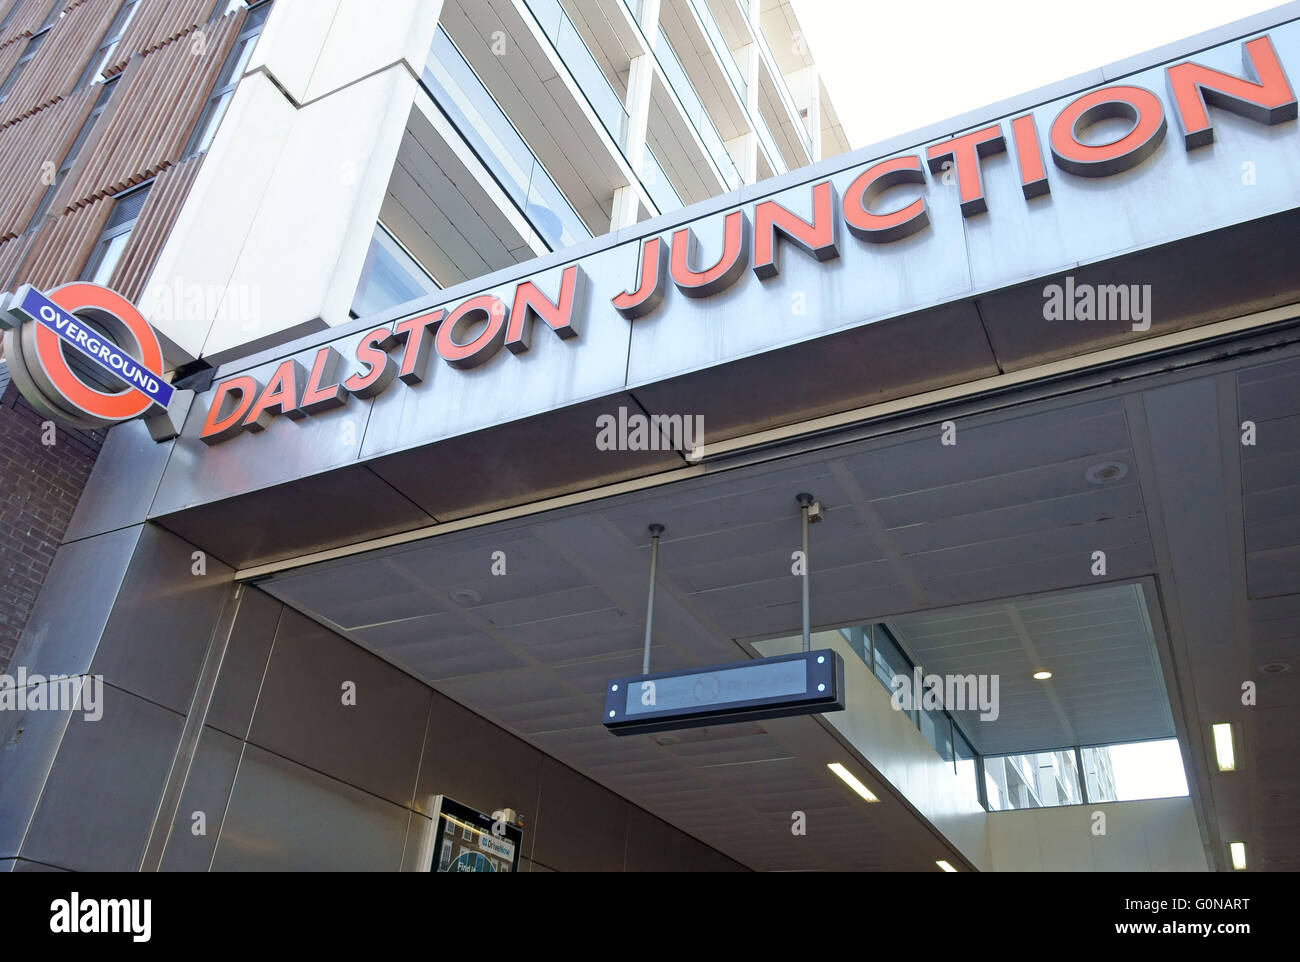 Gentrification in Dalston, East London - Dalston Junction Overground station Stock Photo